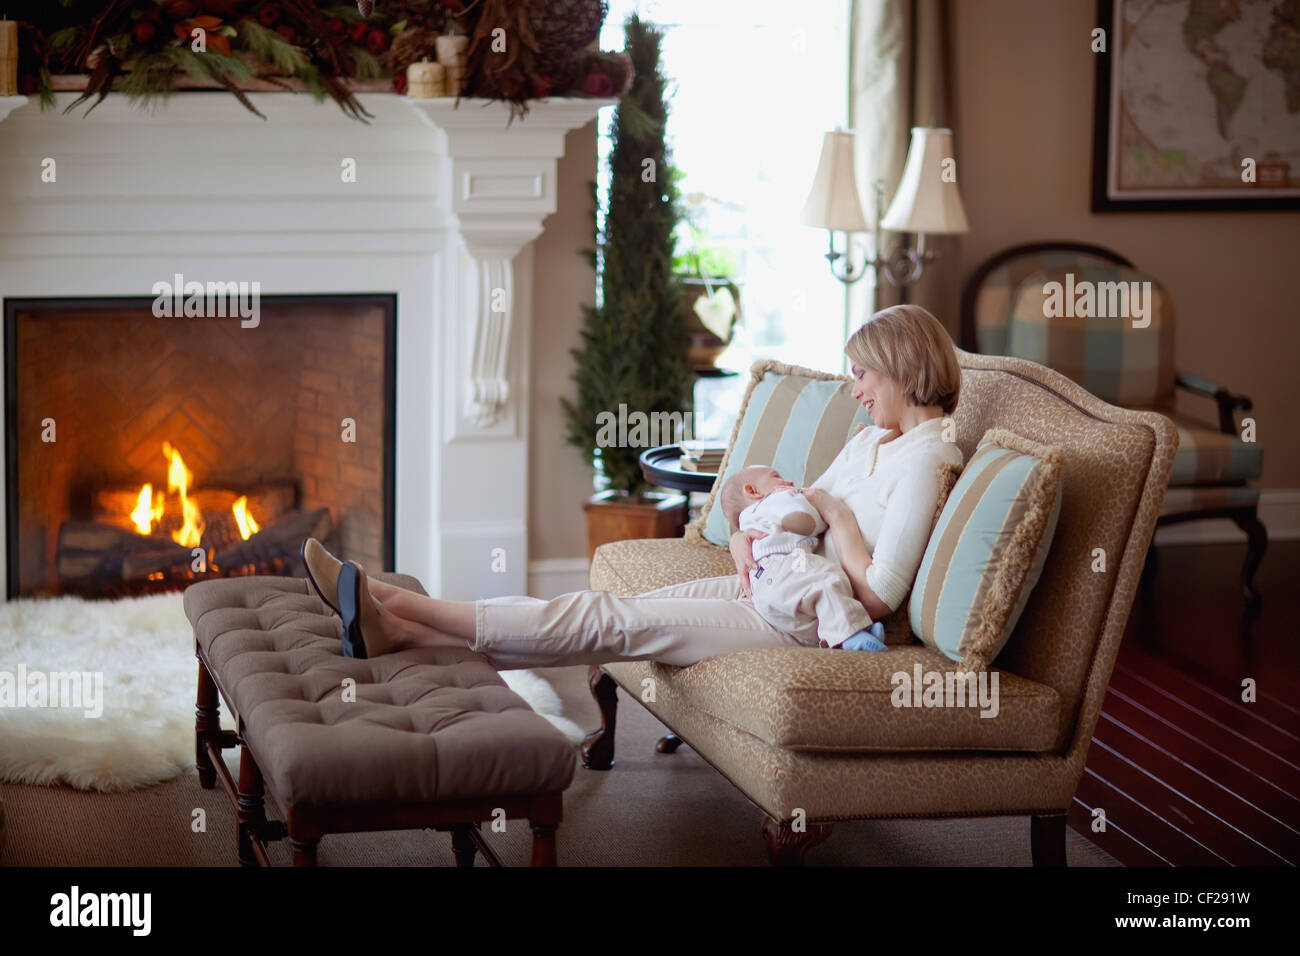 A Mother Holding Her Baby By A Fireplace In The Living Room; Jordan Ontario Canada Stock Photo